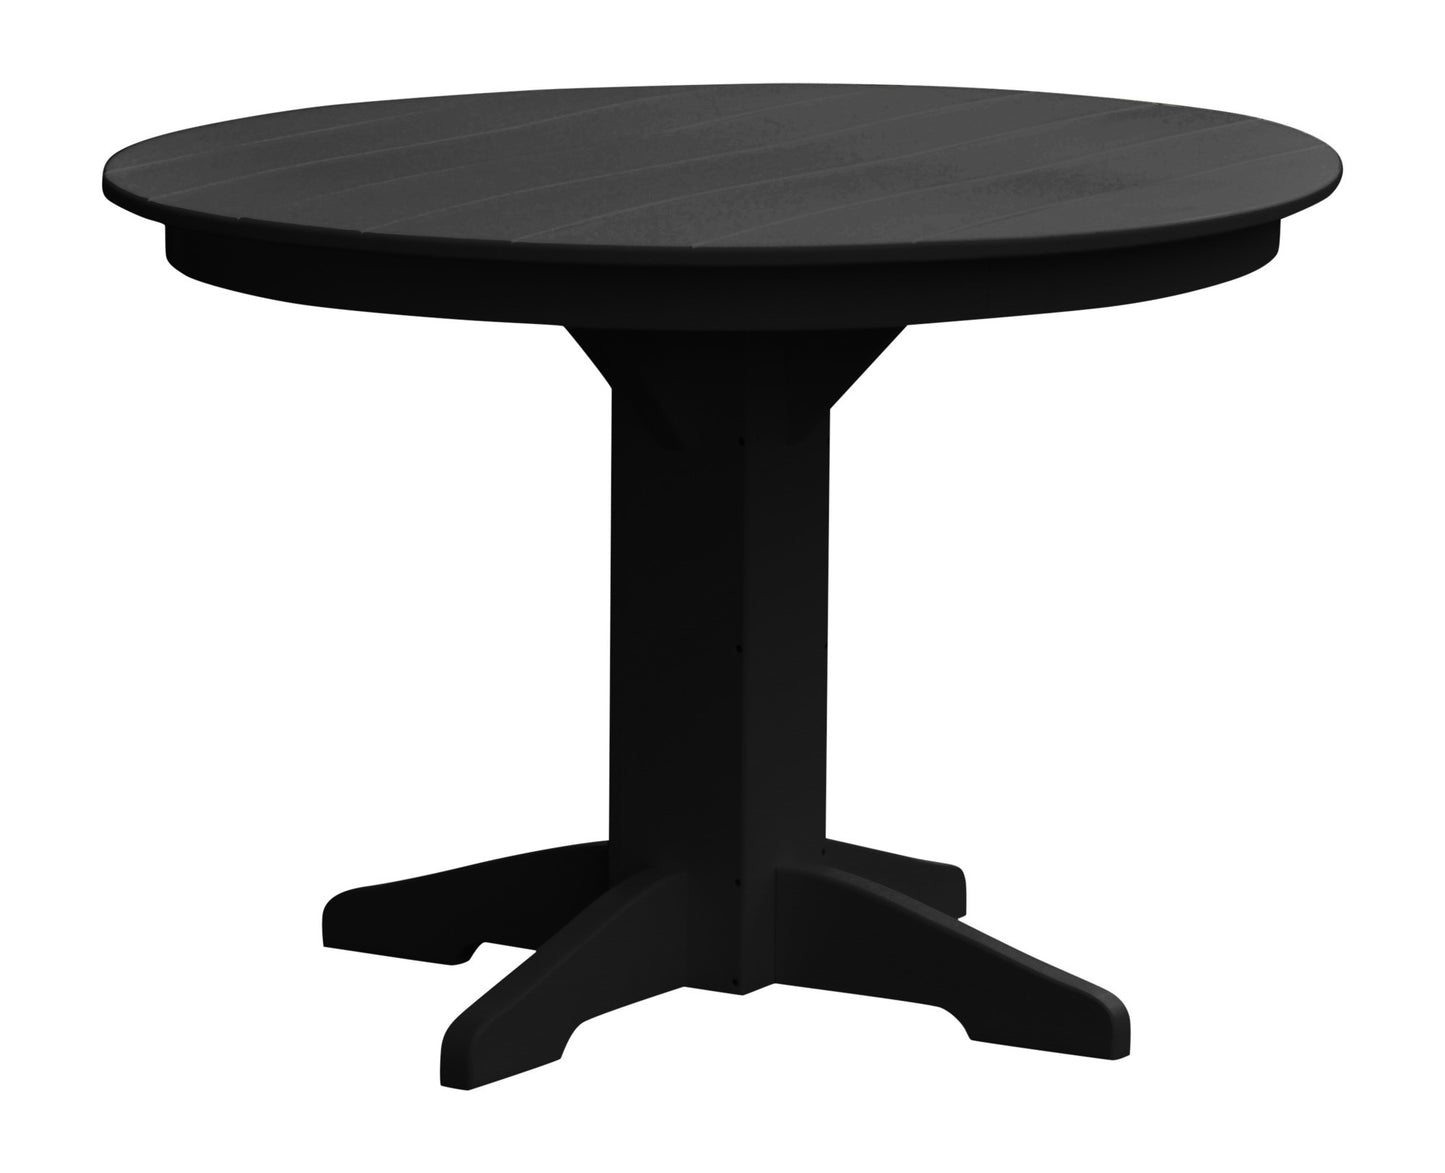 A&L Furniture Recycled Plastic 44" Round Dining Table - Black